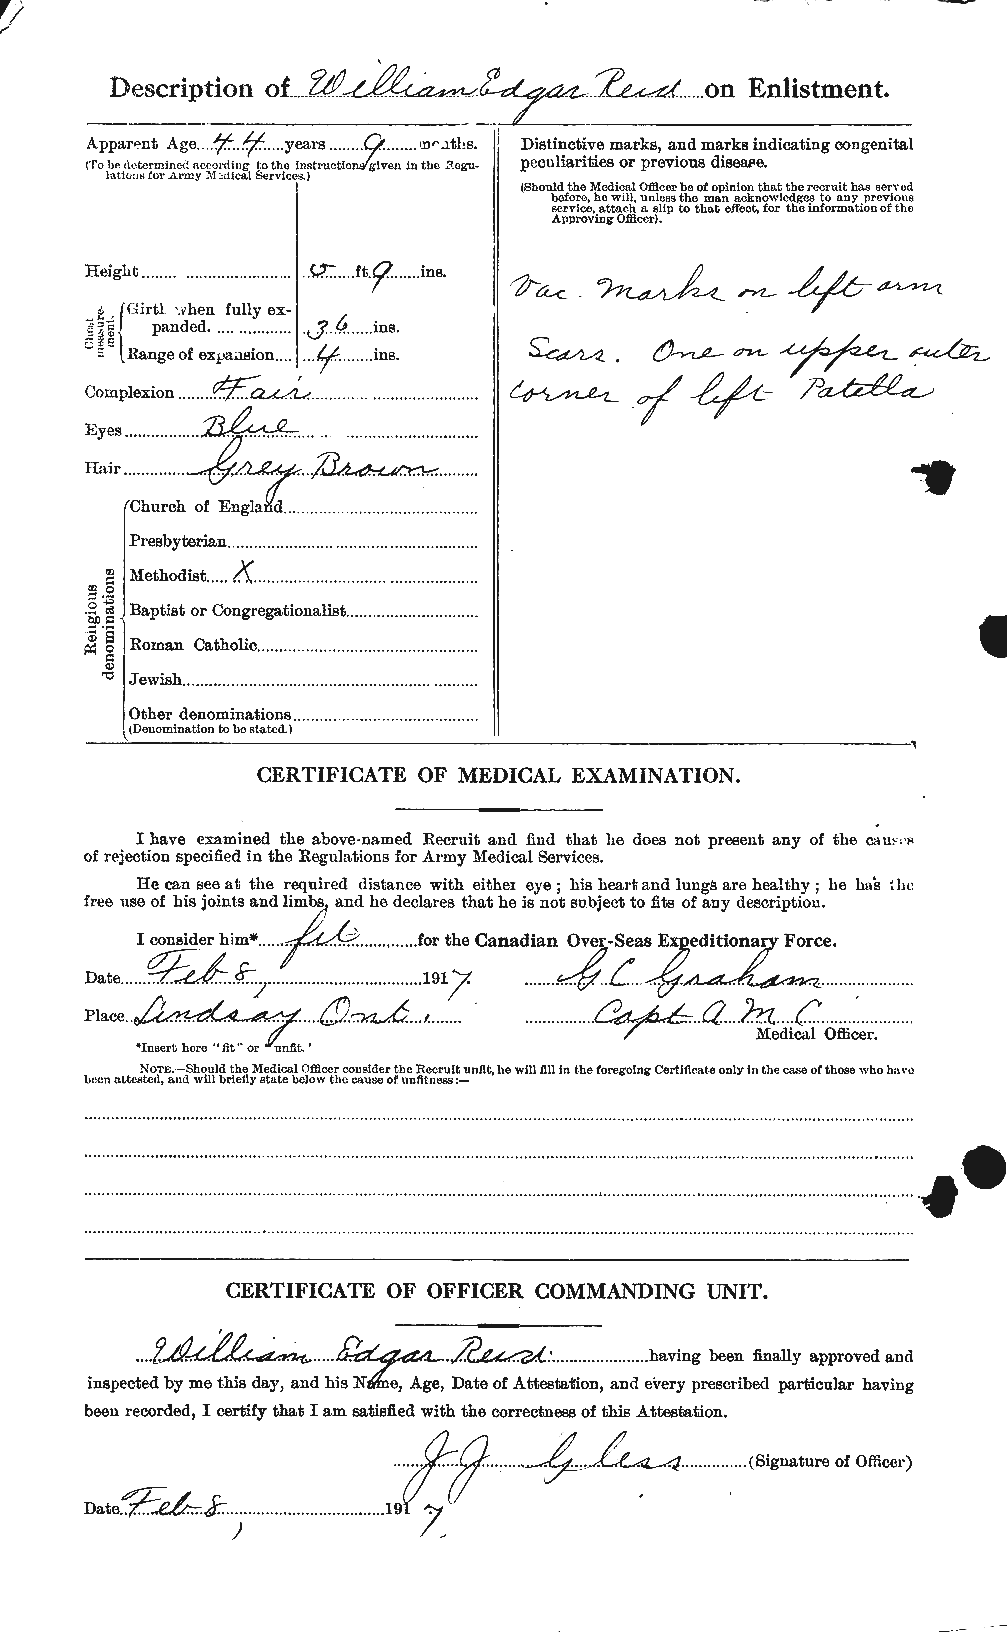 Personnel Records of the First World War - CEF 596981b